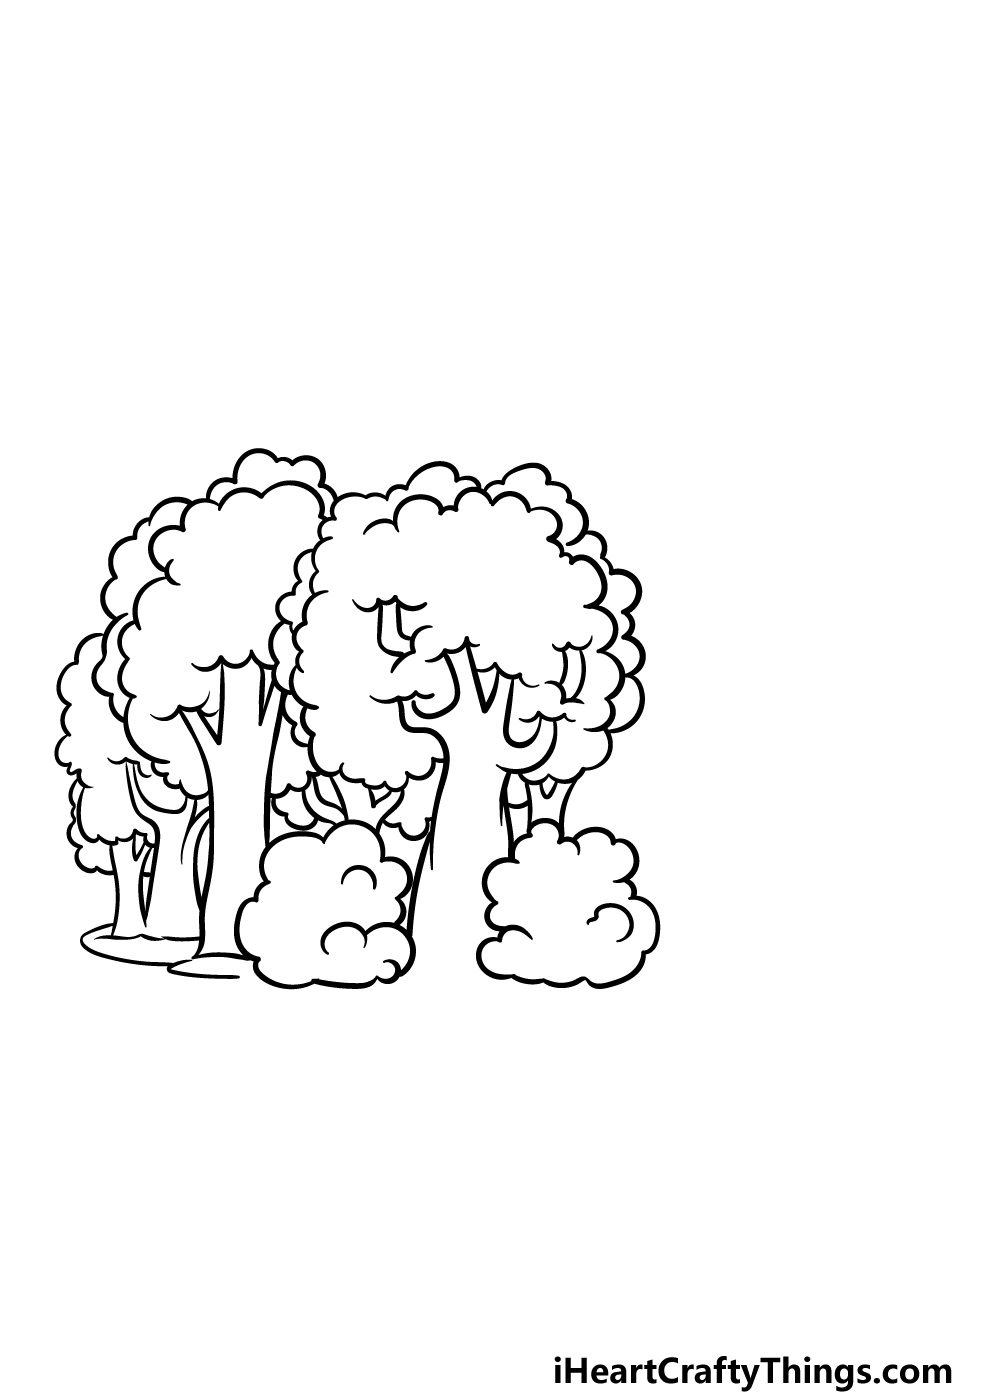 how to draw a cartoon forest step 4